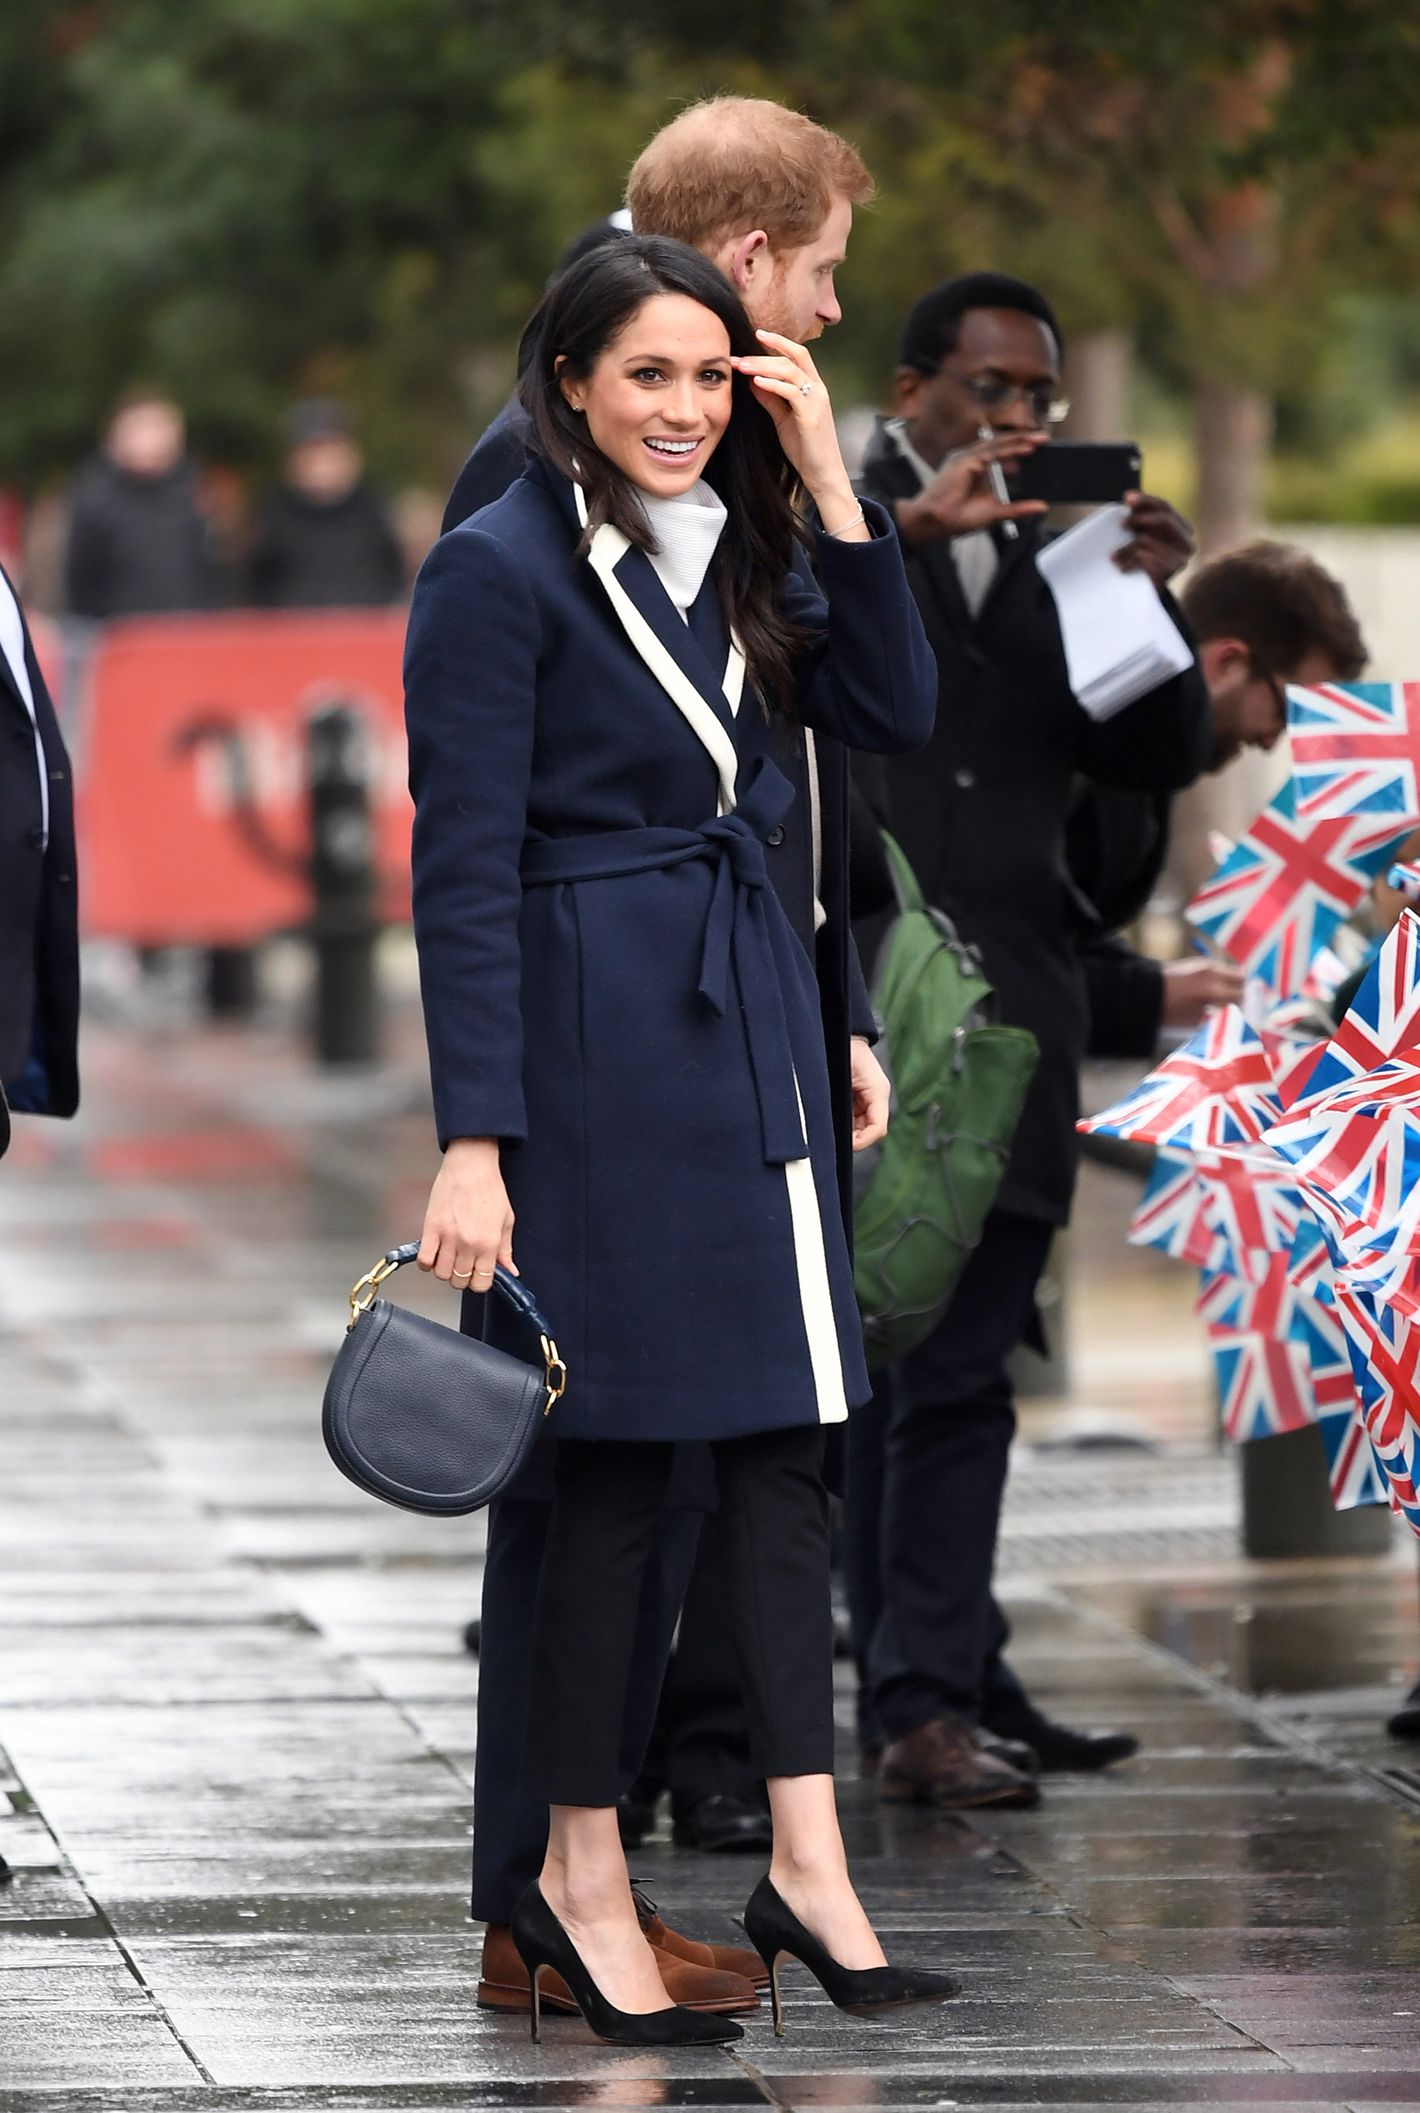 How Meghan Markle Gets Clothes for Her Royal Wardrobe